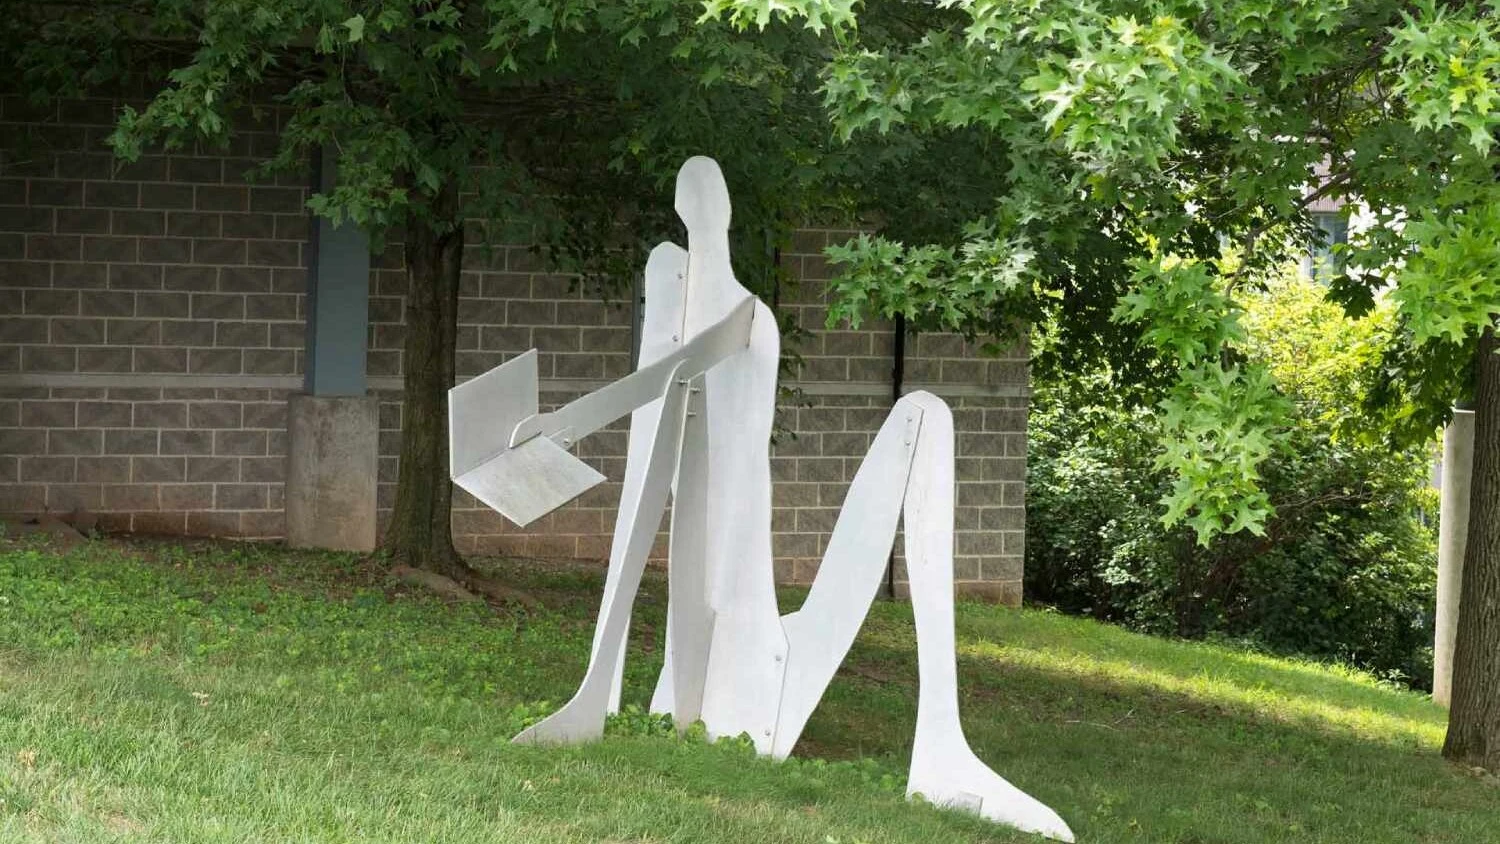 a white metal sculpture that resembles a person reading a book